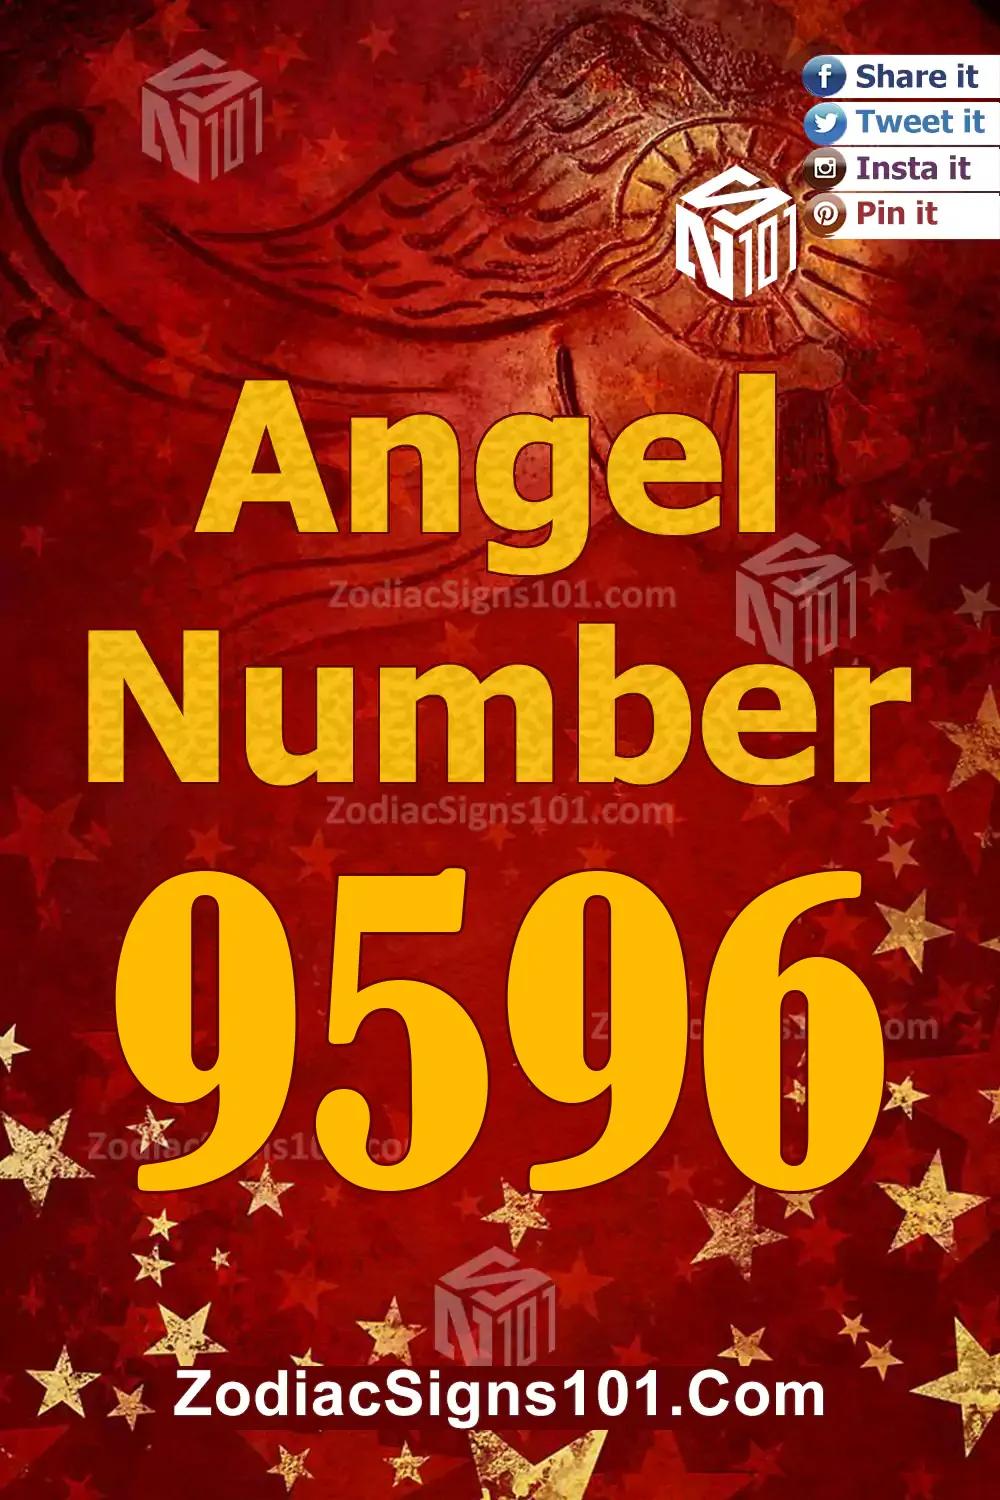 9596 Angel Number Meaning